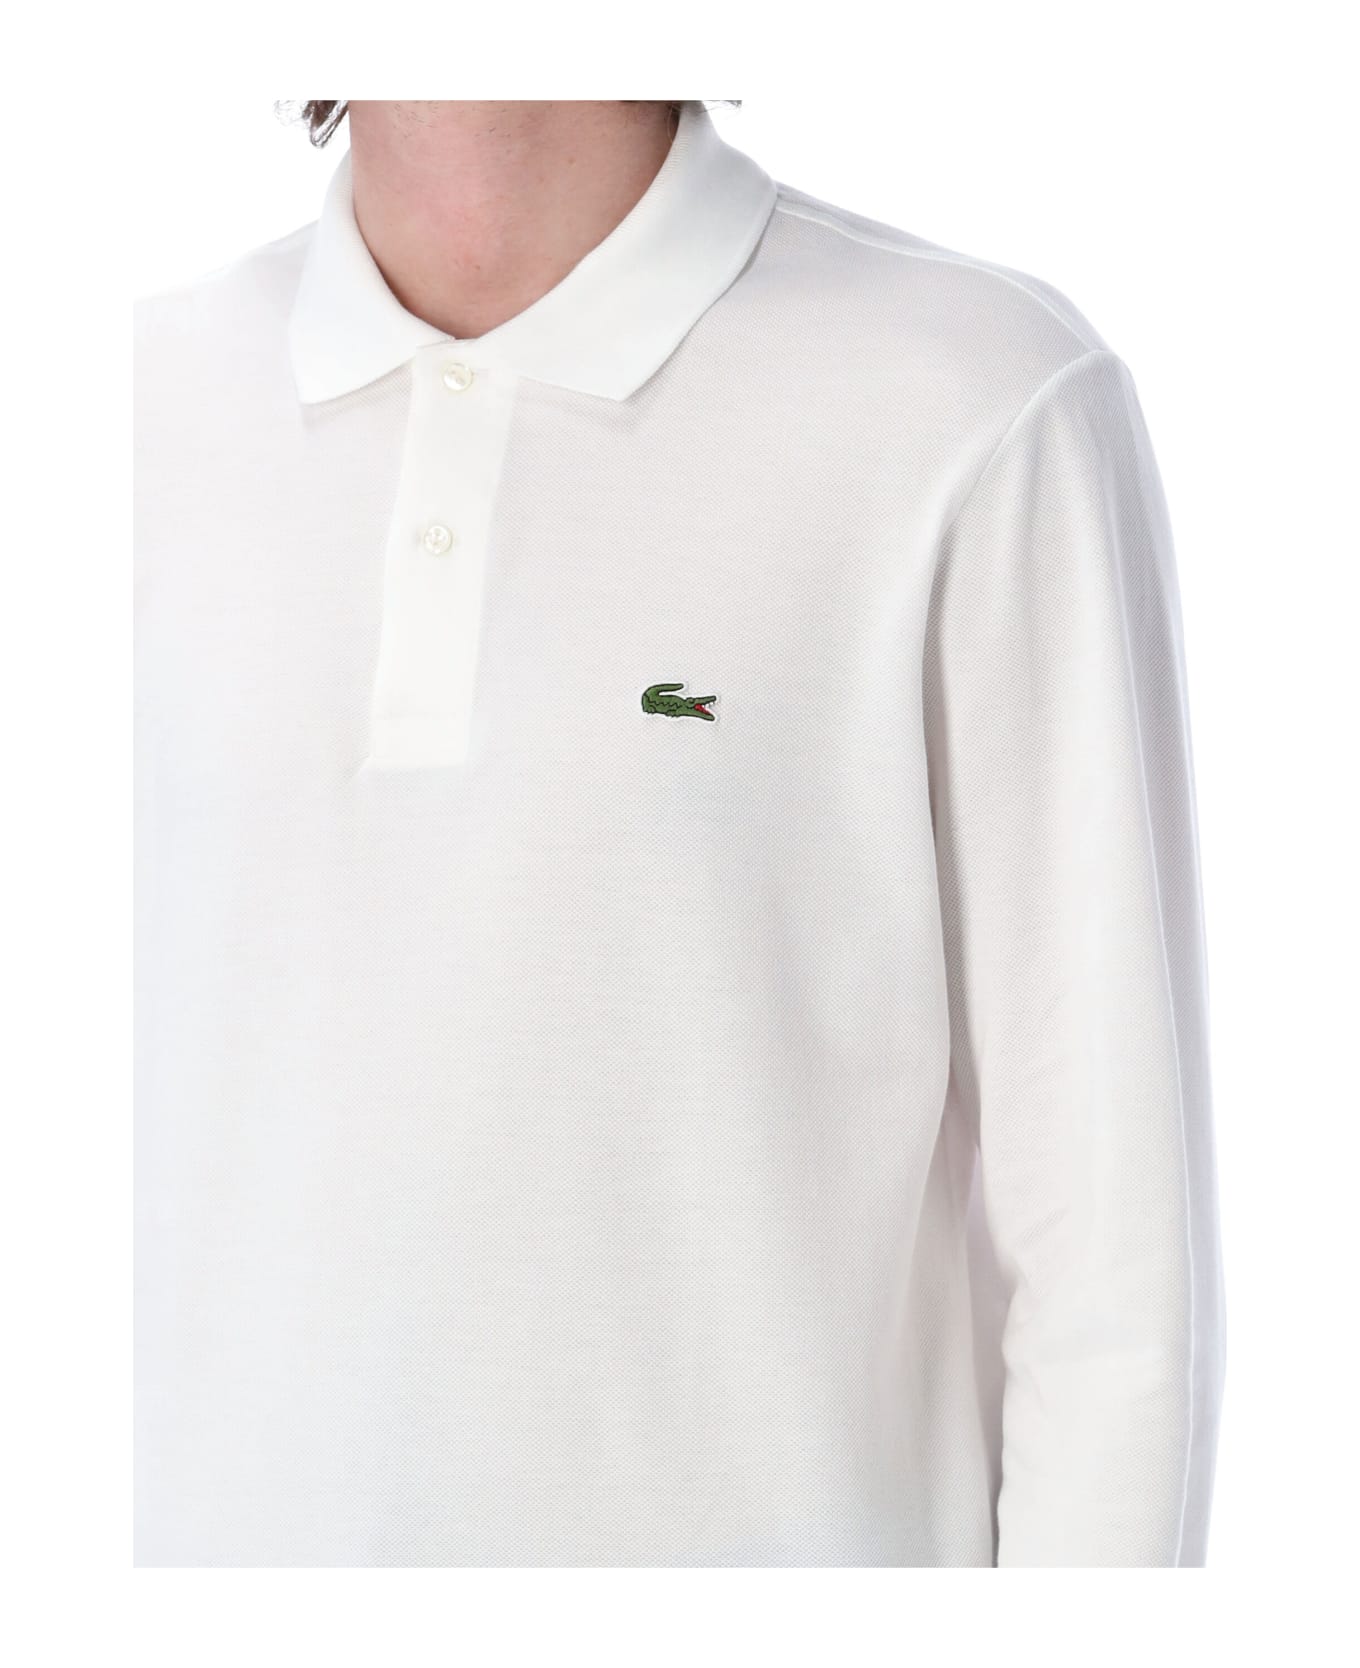 Lacoste Classic Fit L/s Polo Shirt - WHITE